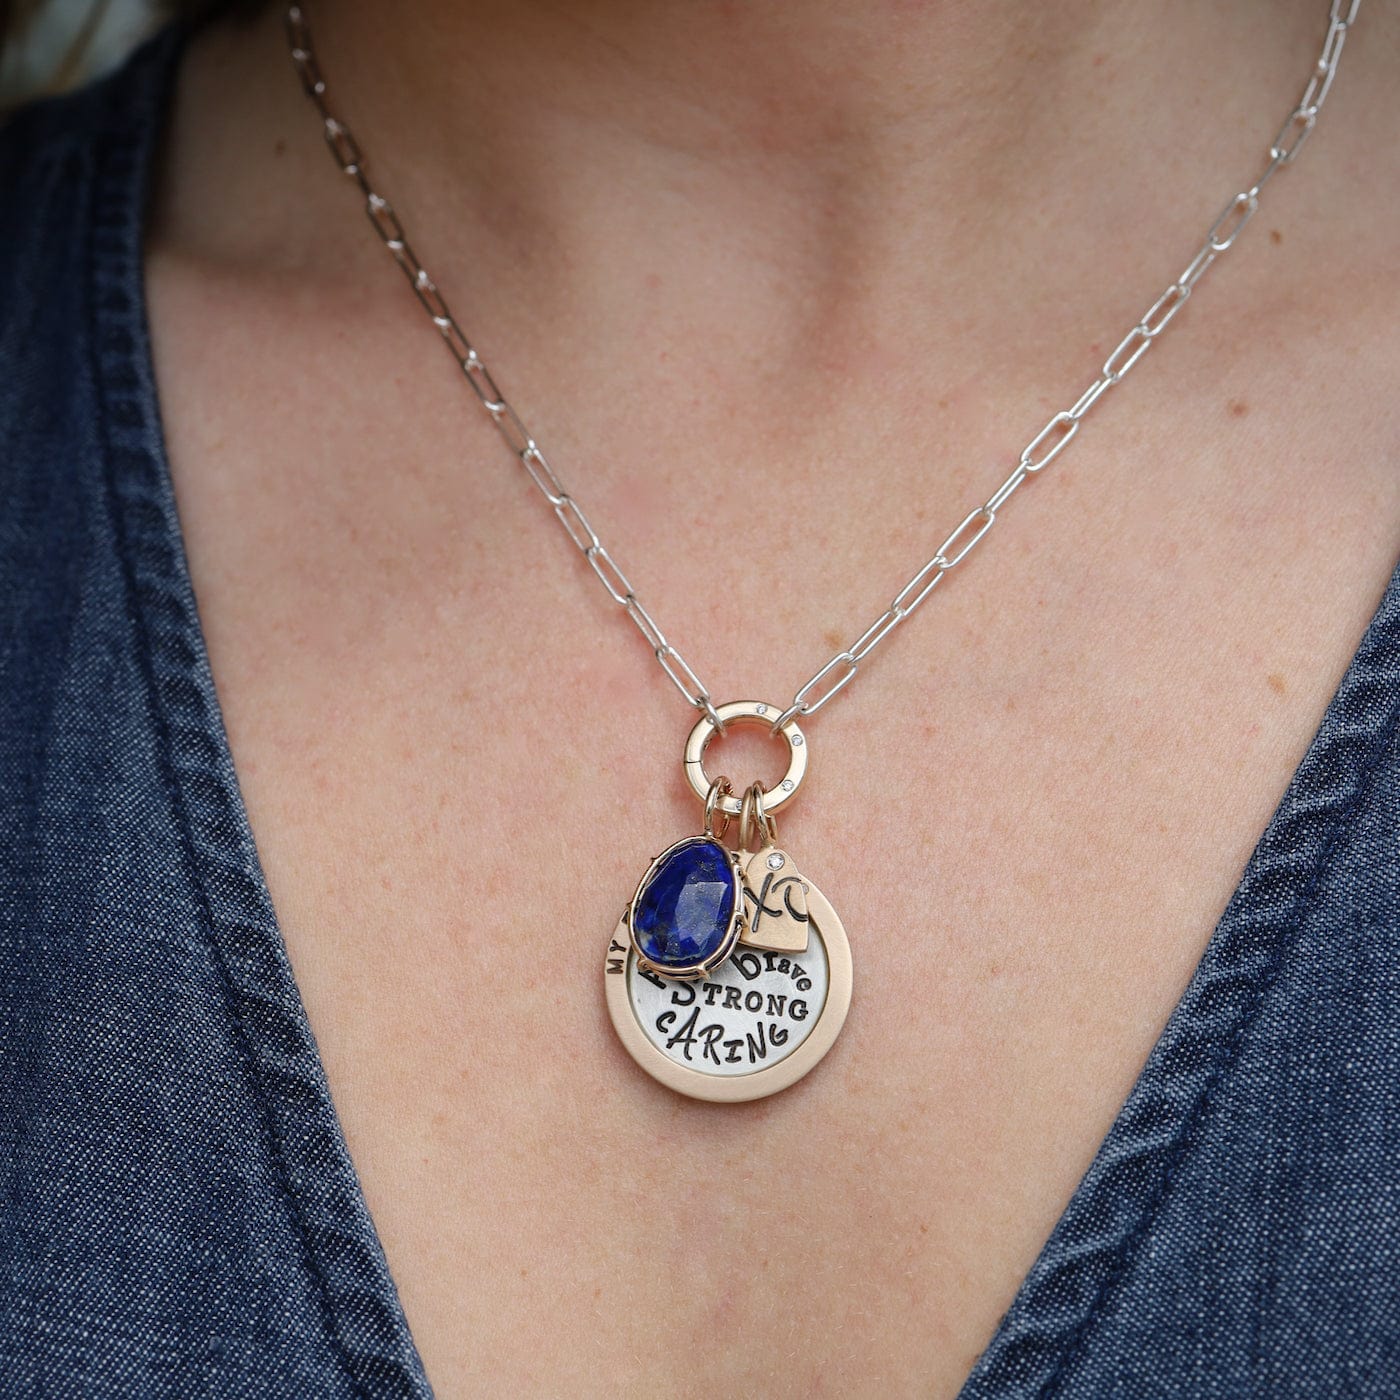 CHM One of a Kind Lapis Harriet Stone Charm